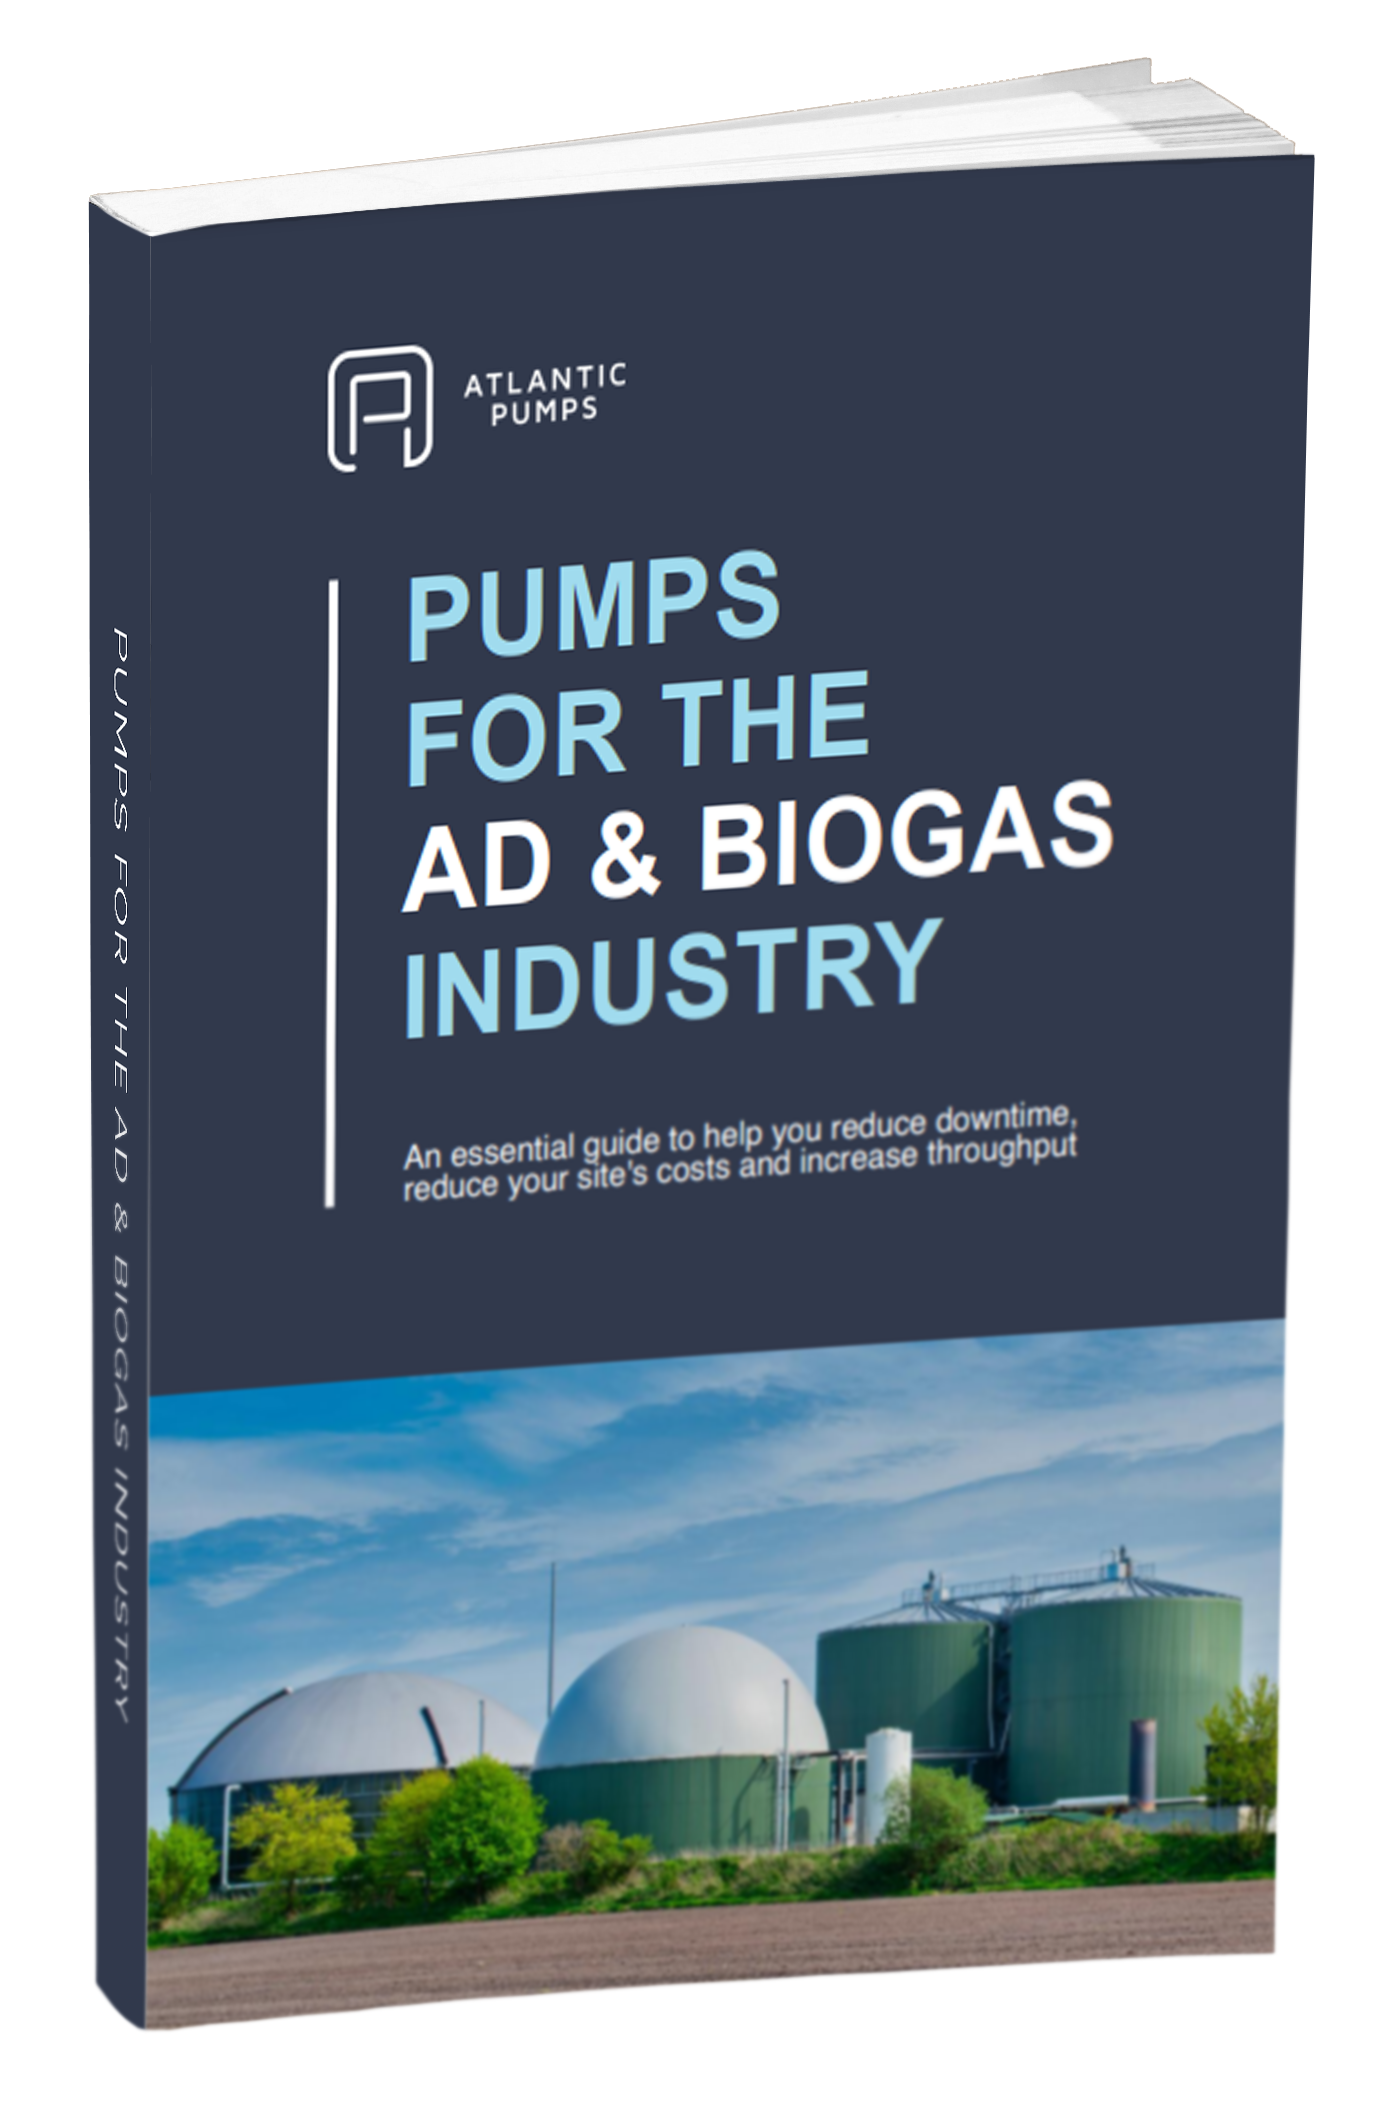 Pumps for the AD and Biogas Industry brochure